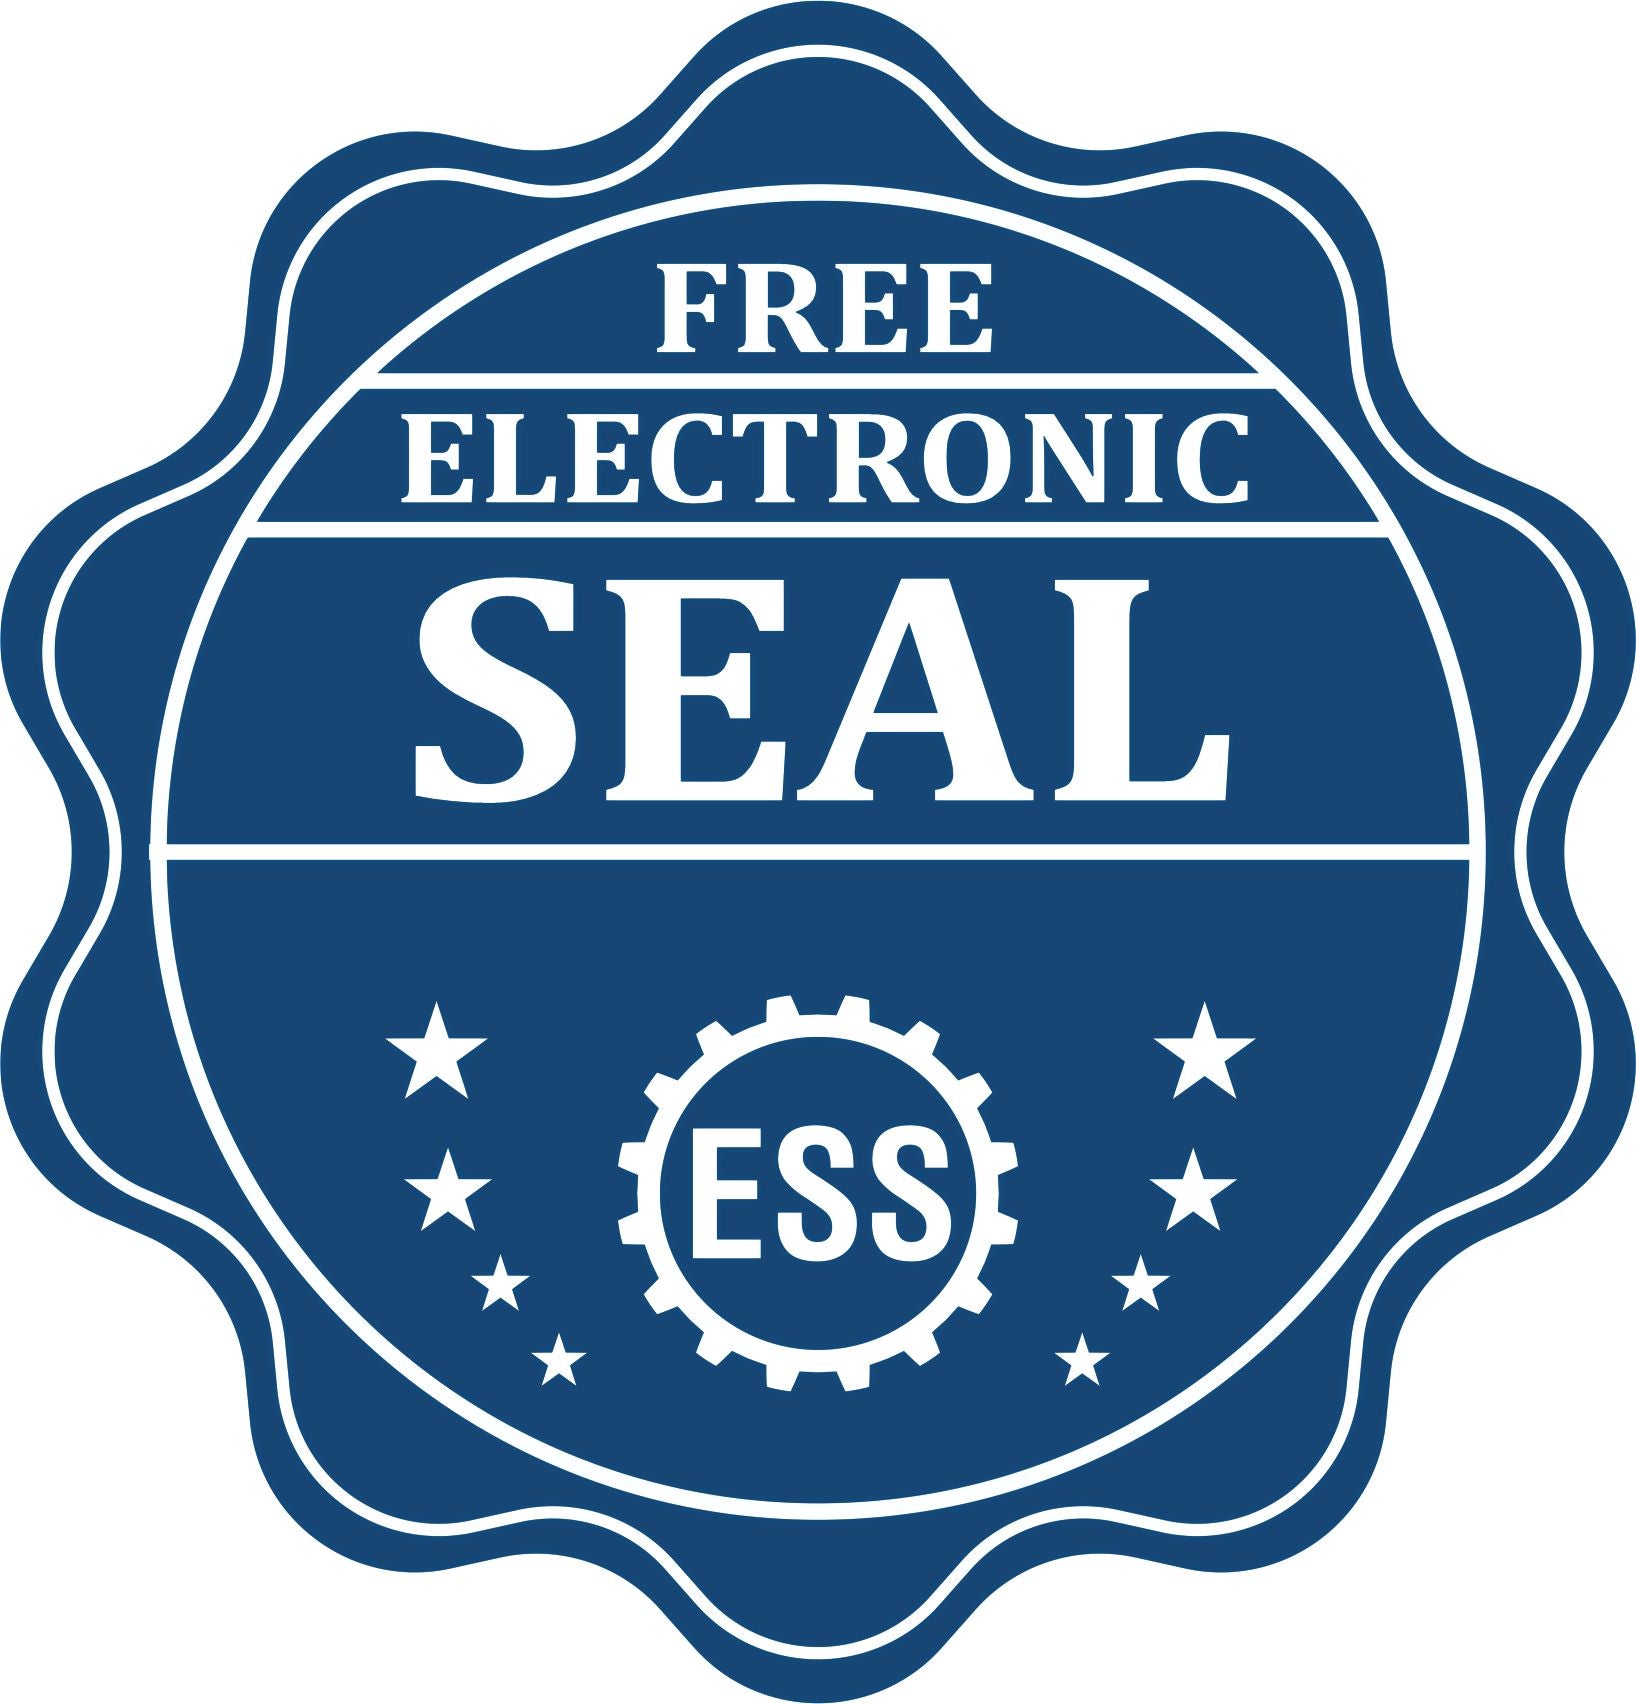 A badge showing a free electronic seal for the Premium MaxLight Pre-Inked Wisconsin Geology Stamp with stars and the ESS gear on the emblem.